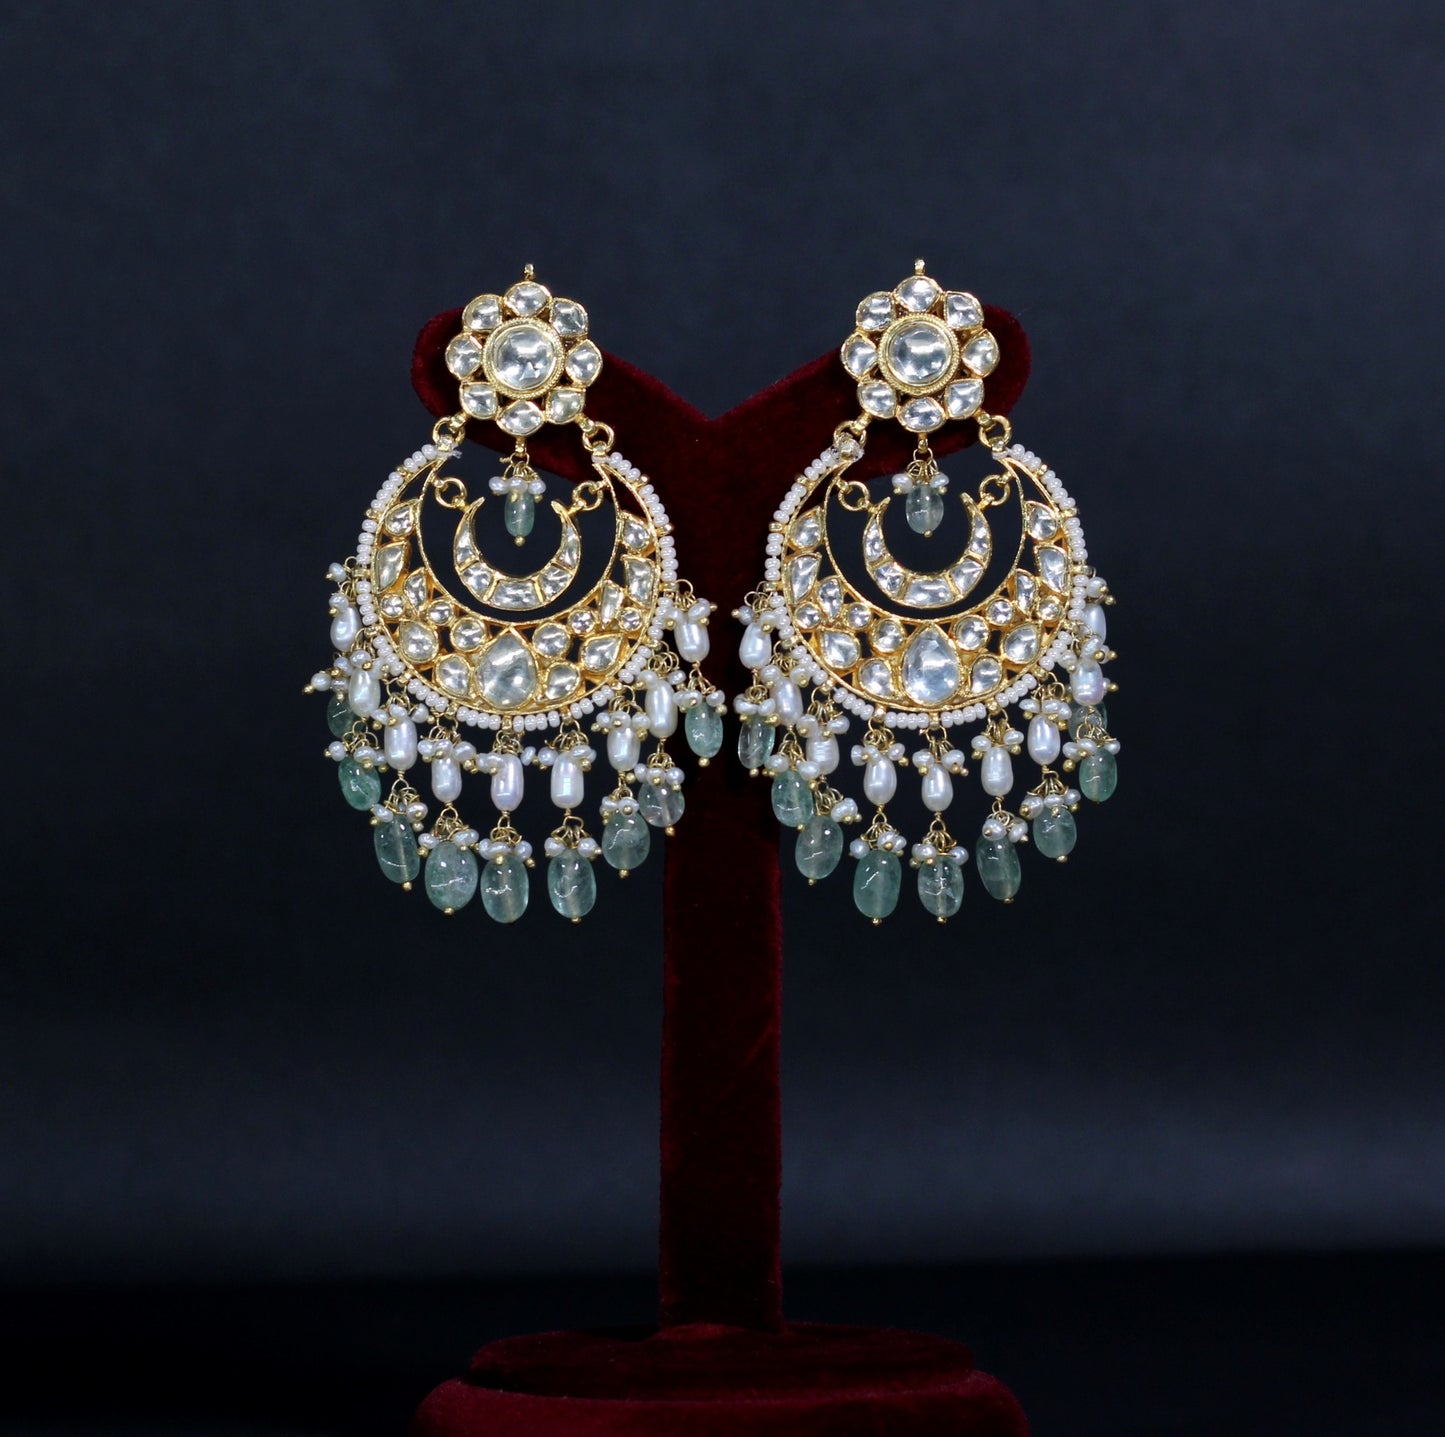 EARRINGS IN 92.5 STERLING SILVER WITH 18KT GOLD PLATED WITH POLKI ,FLOURIDE STONES AND FRESH WATER PEARLS